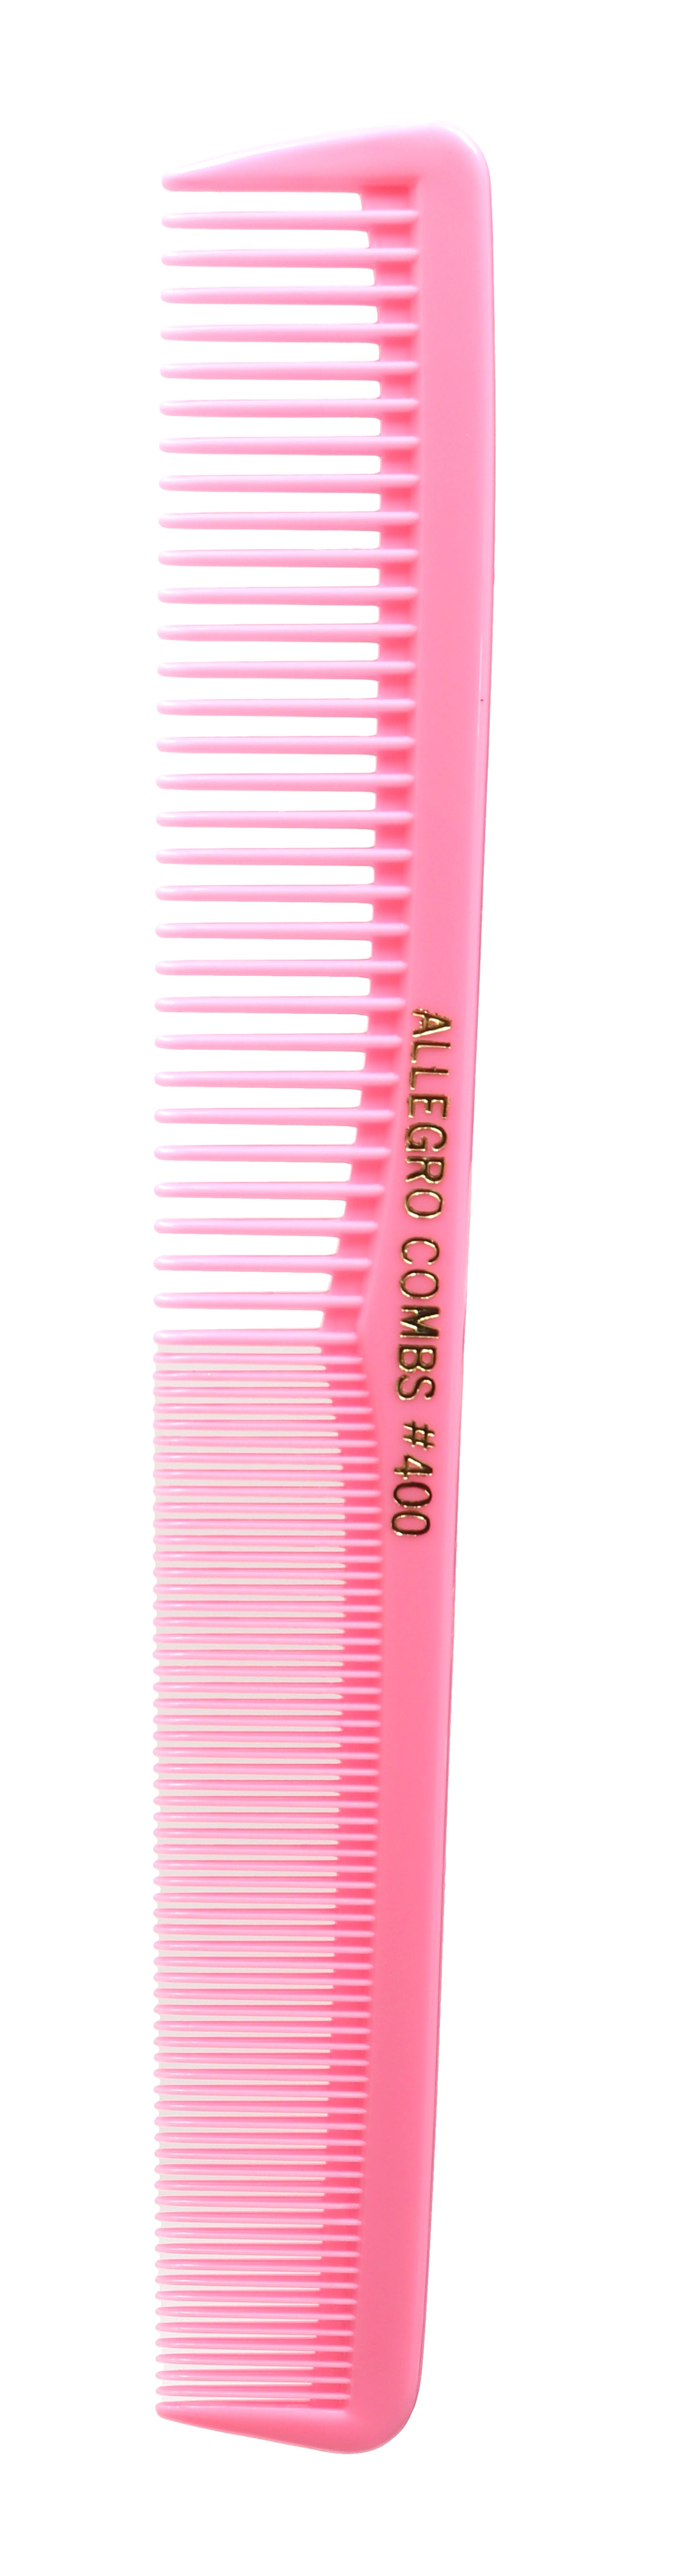 Allegro Combs 400 Barber For Hair Cutting All Purpose Combs Women's Men's Fresh Mix 12 Pk